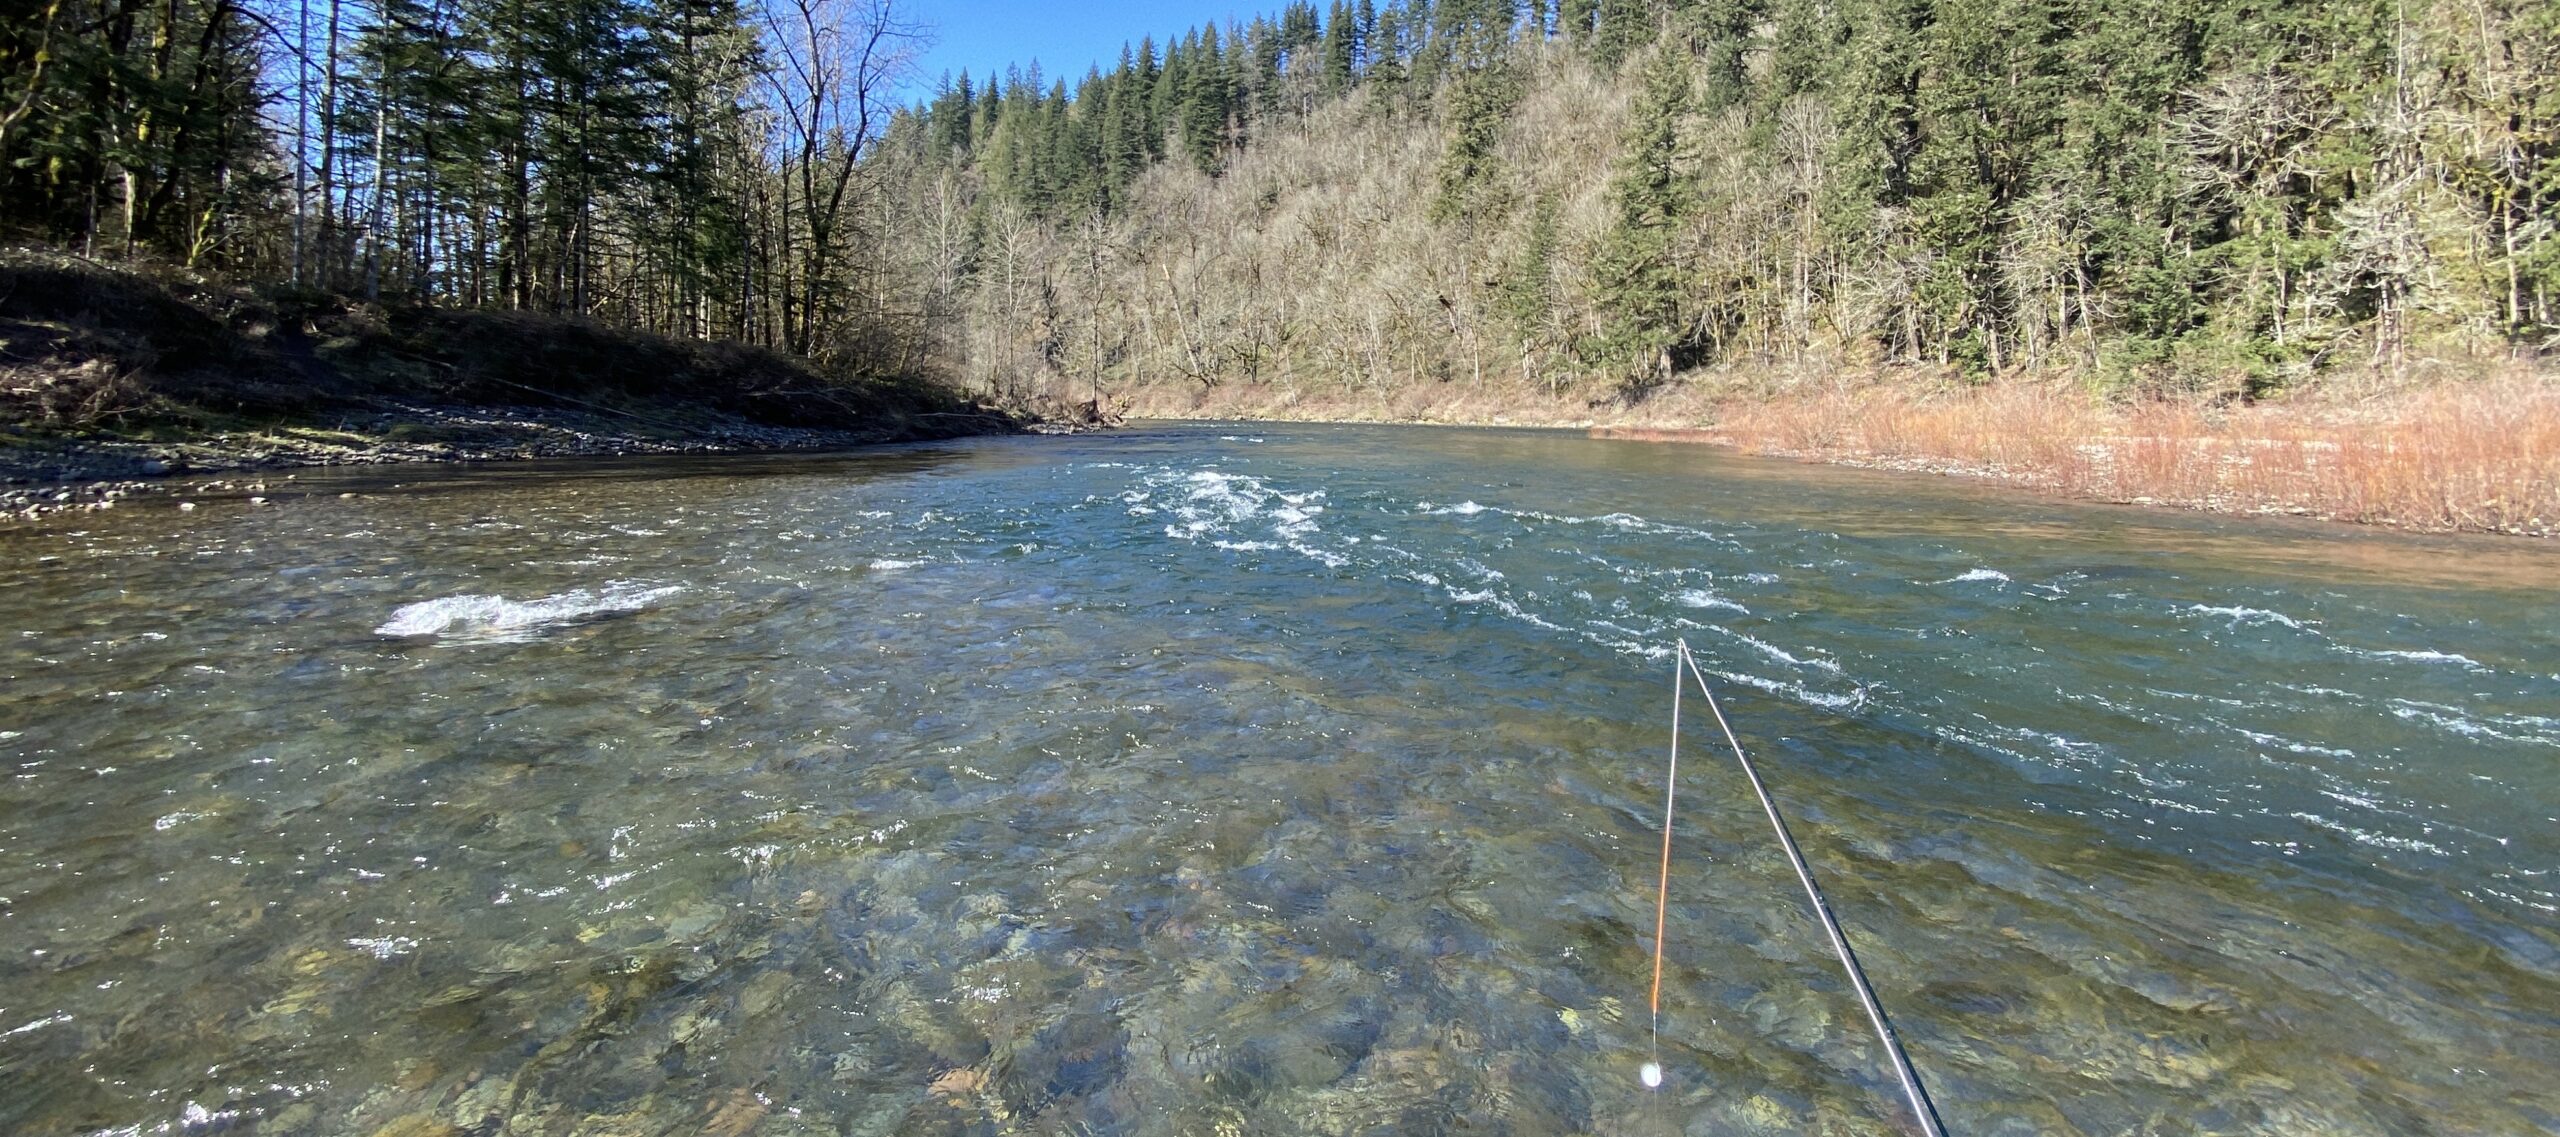 Why We Love Portland: The Sandy River